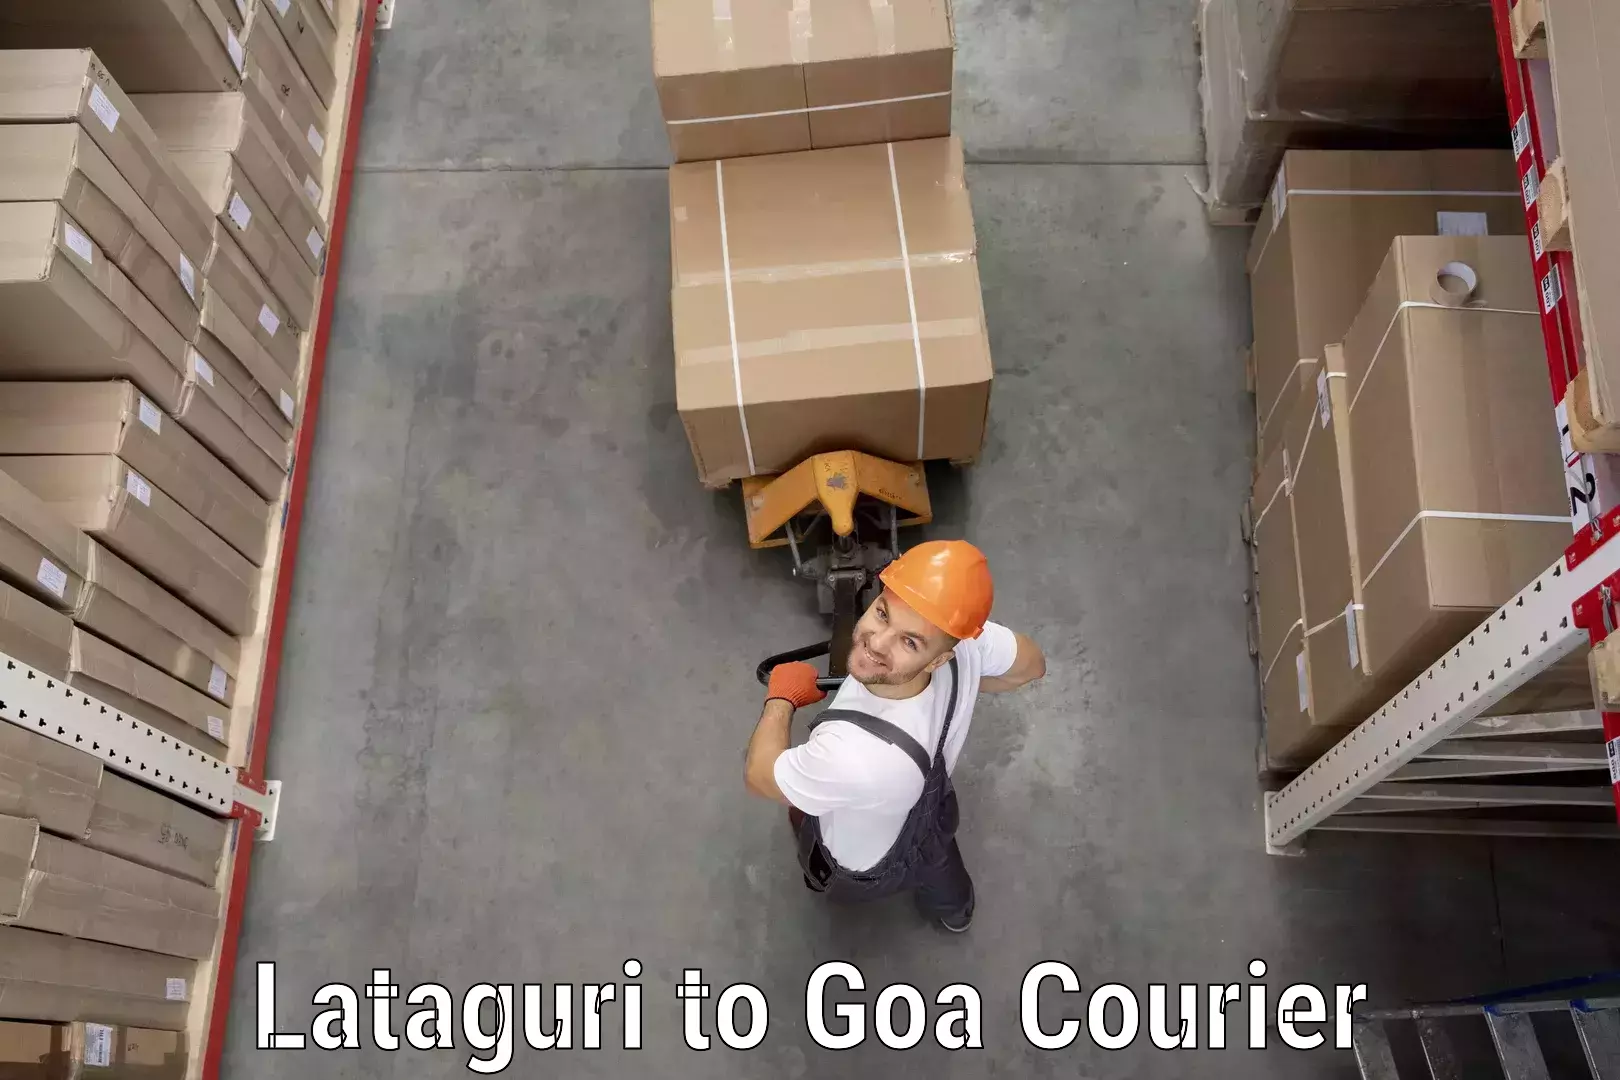 Next-day delivery options Lataguri to Margao